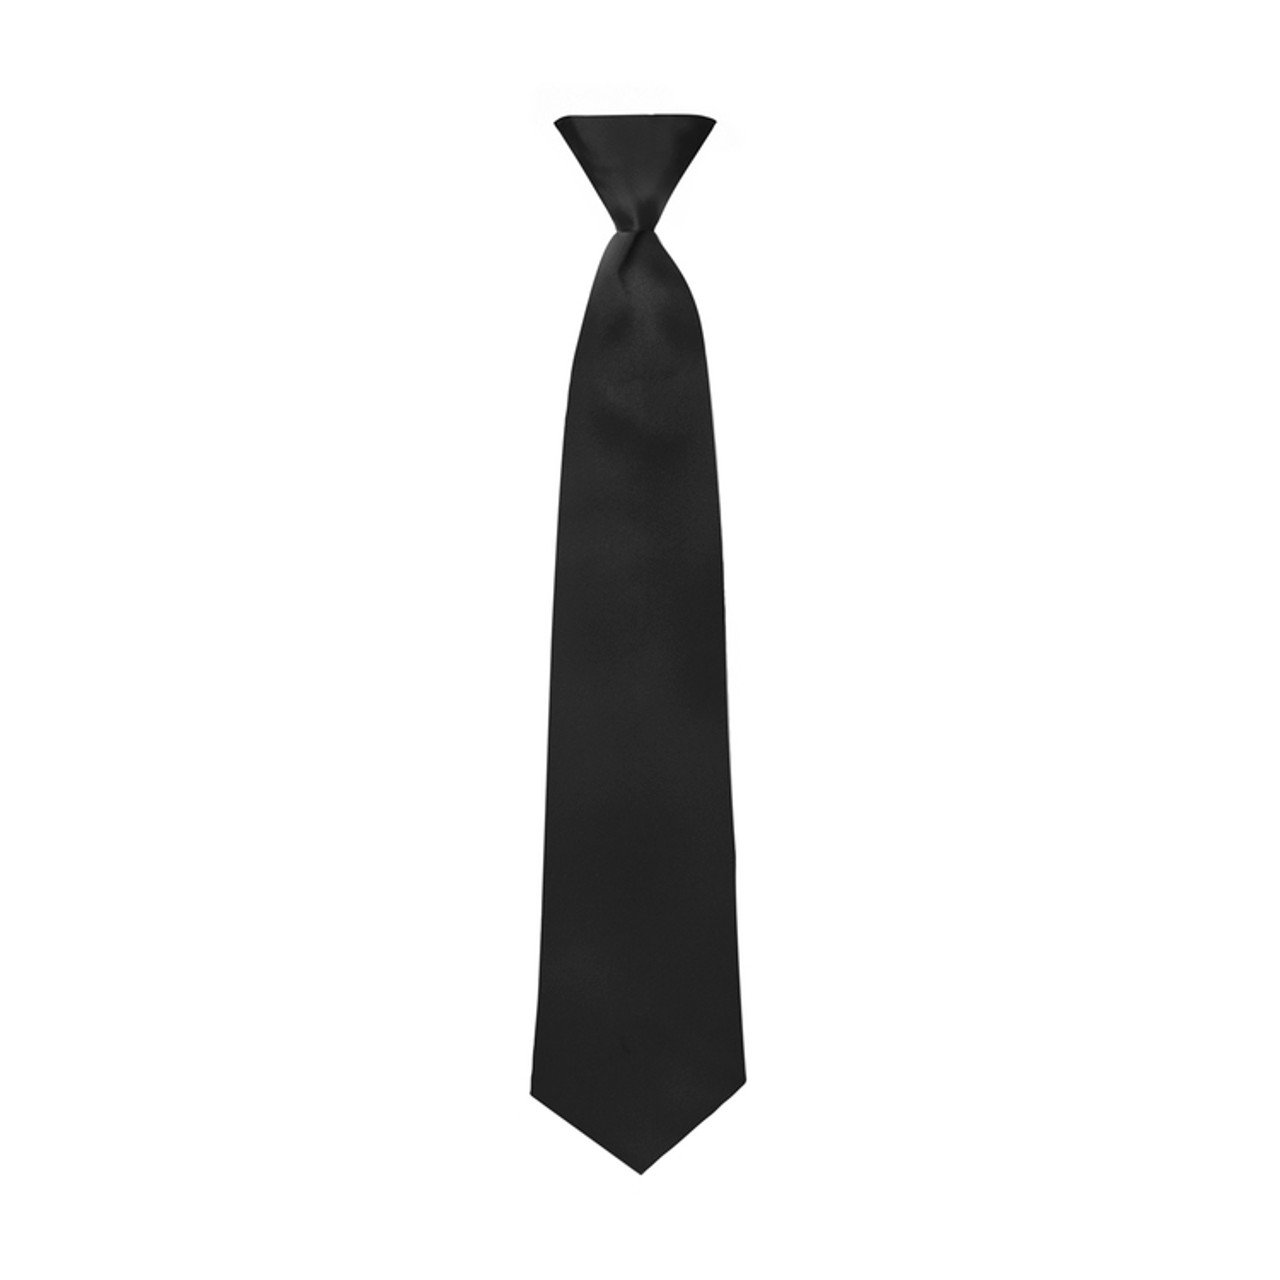 Forgot my collar extender for a balck tie gala. A bread tie from